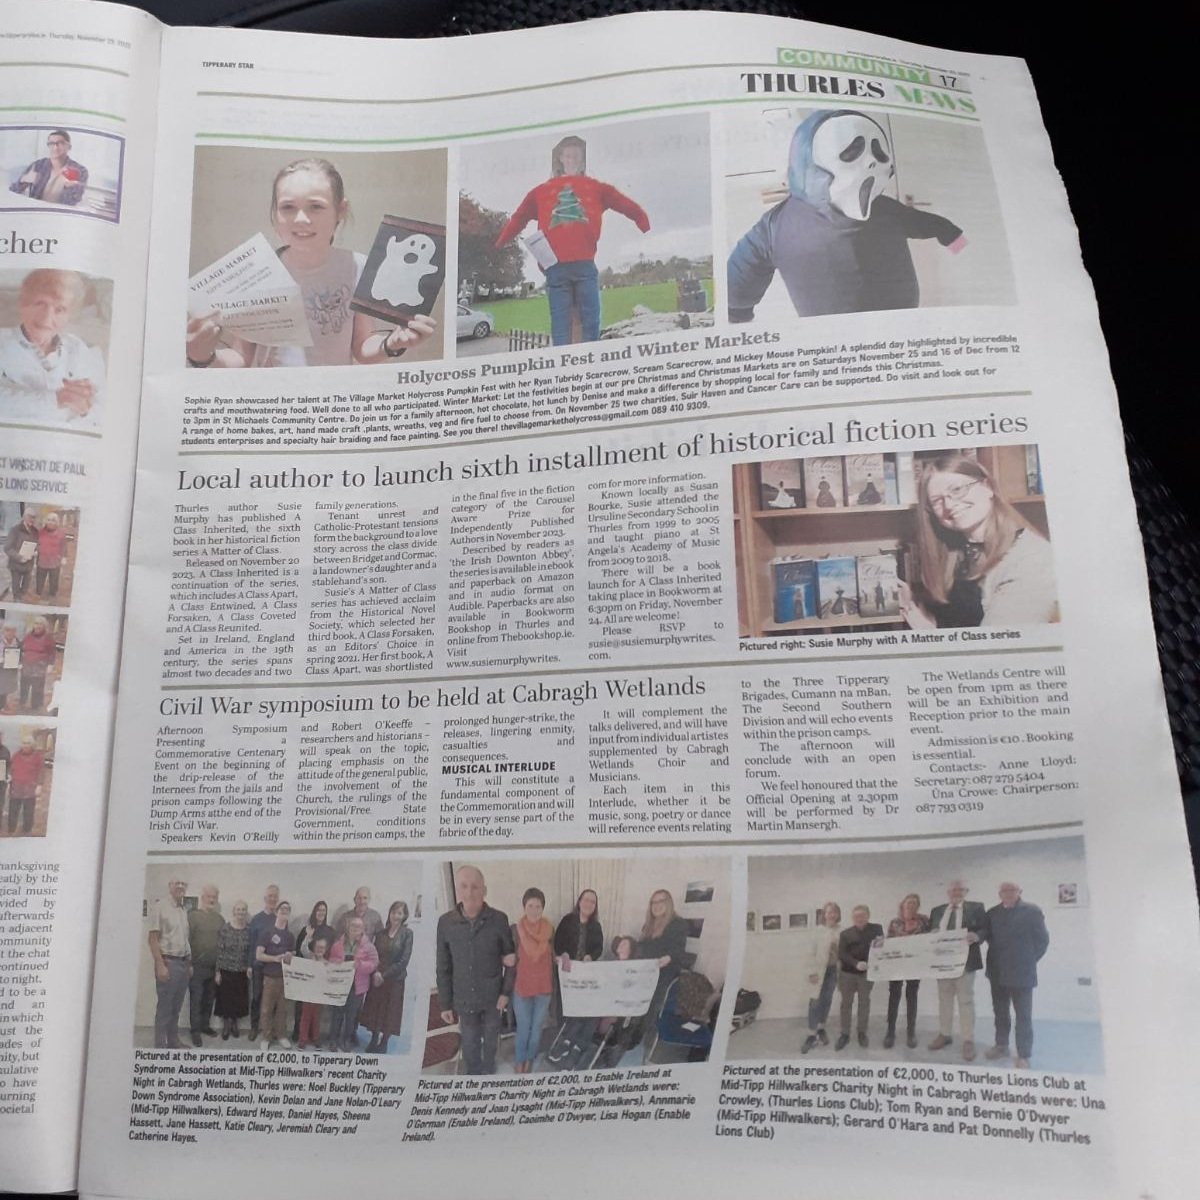 My series made it into not one but two newspapers today!
Thank you @Bookreviewsfor1 for an absolutely fabulous article in the Dungarvan Leader. 🥰
A Class Inherited was also featured in the Tipperary Star! 🎉
#chuffedtobits 😊